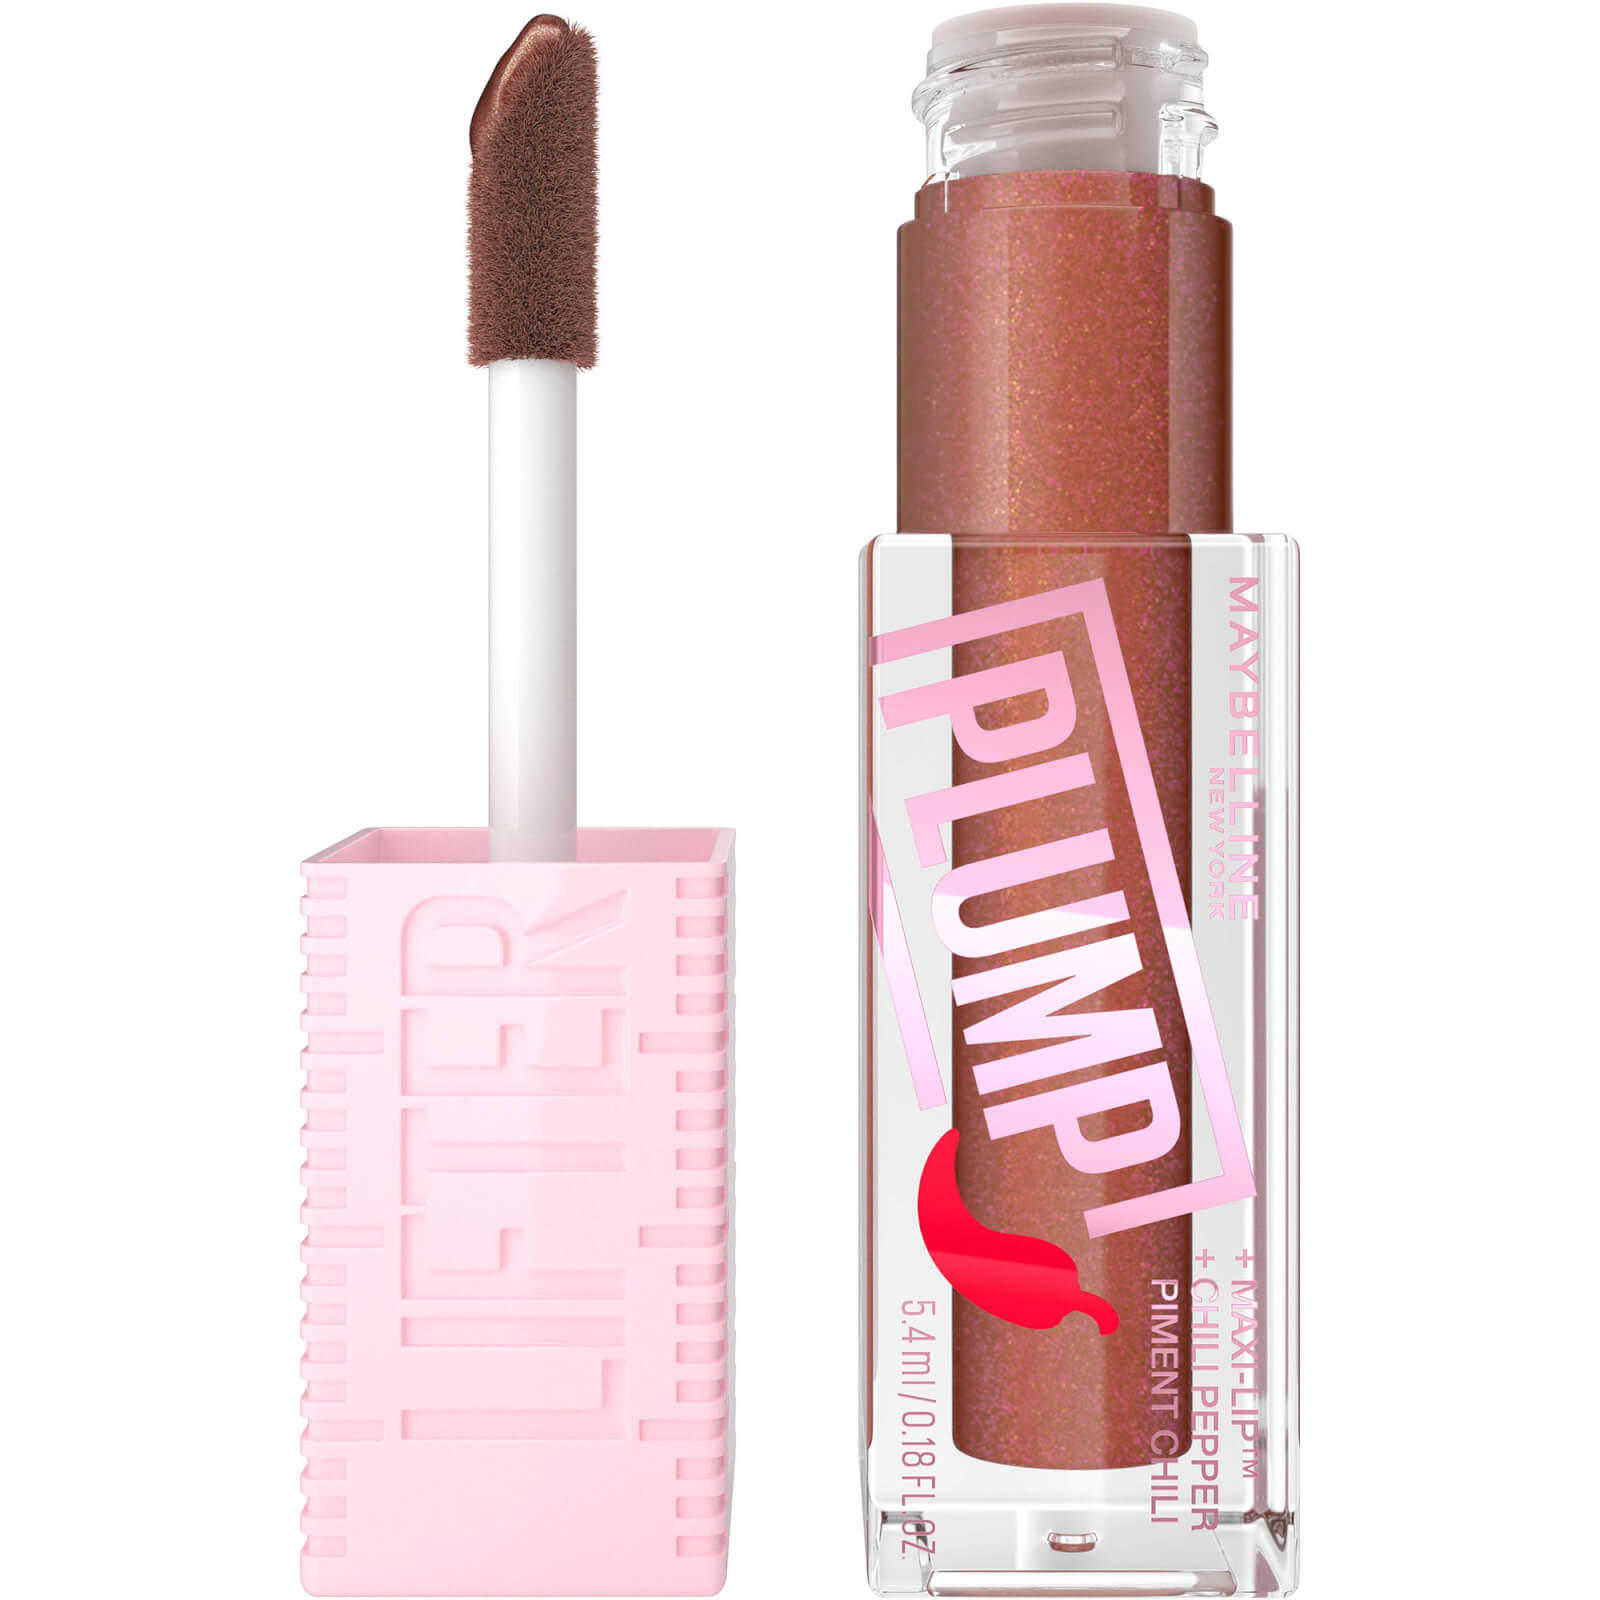 Maybelline Lifter Gloss Plumping Lip Gloss Lasting Hydration Formula With Hyaluronic Acid and Chilli